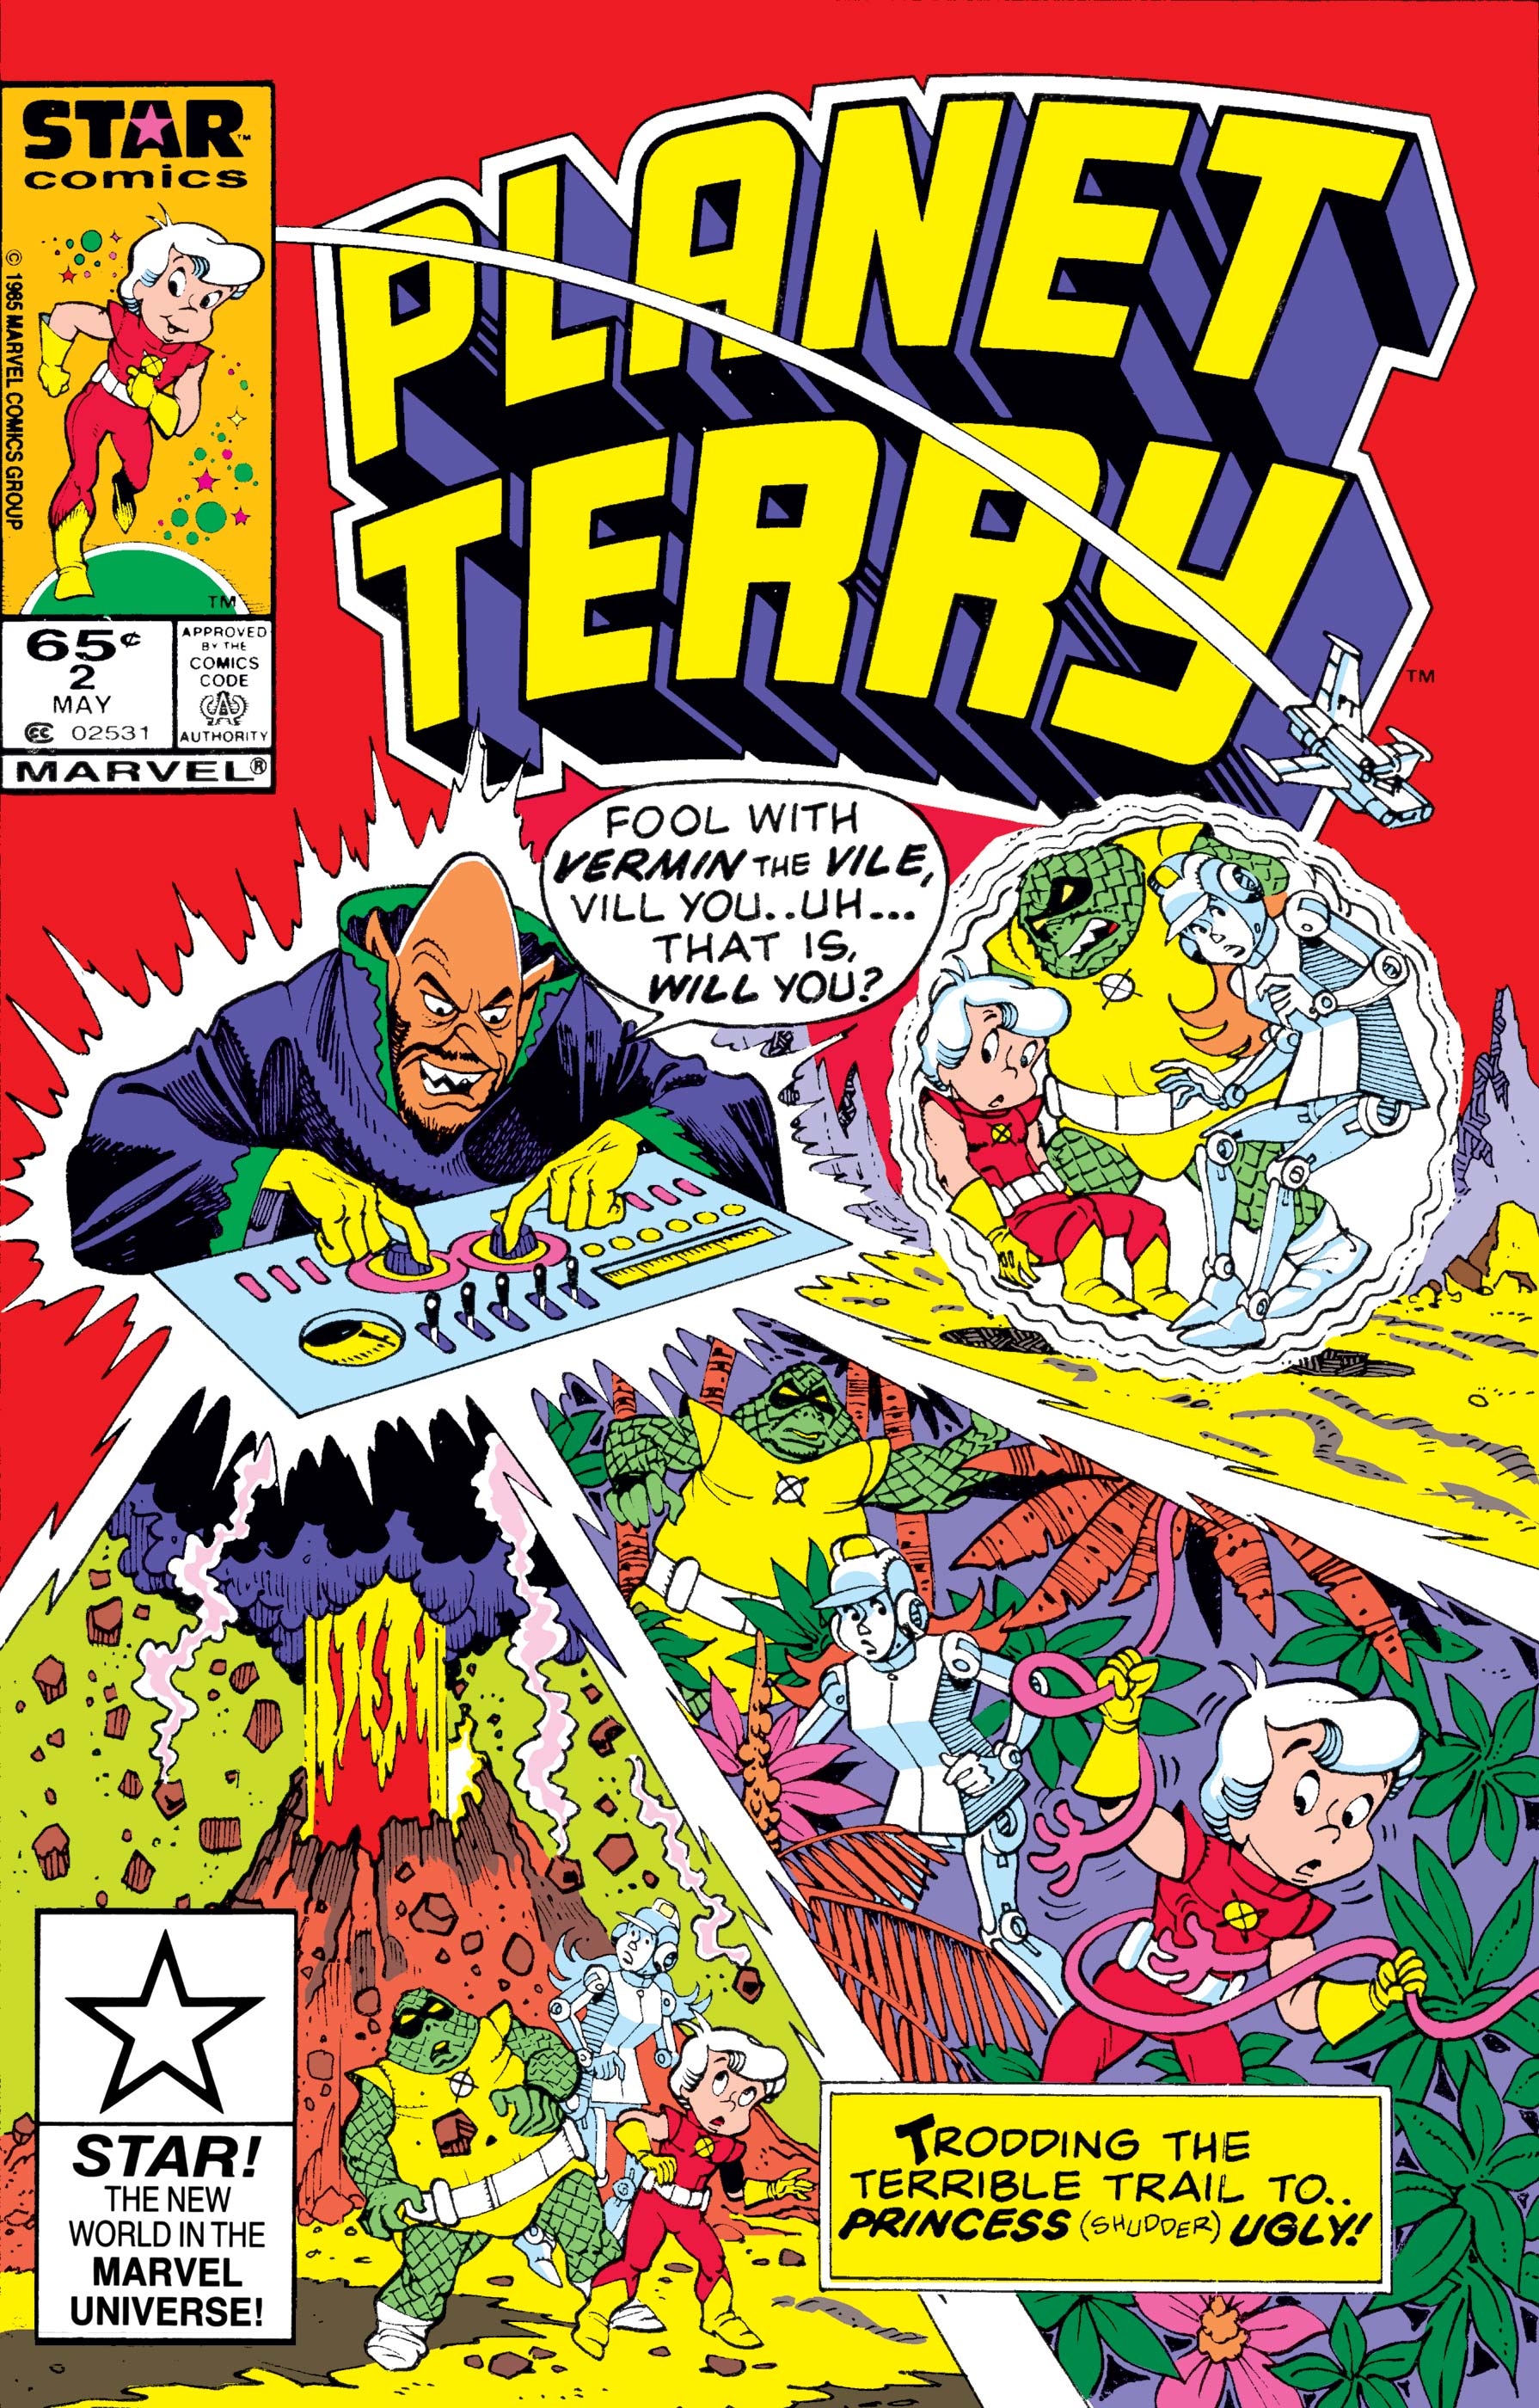 Planet Terry (1985) #2